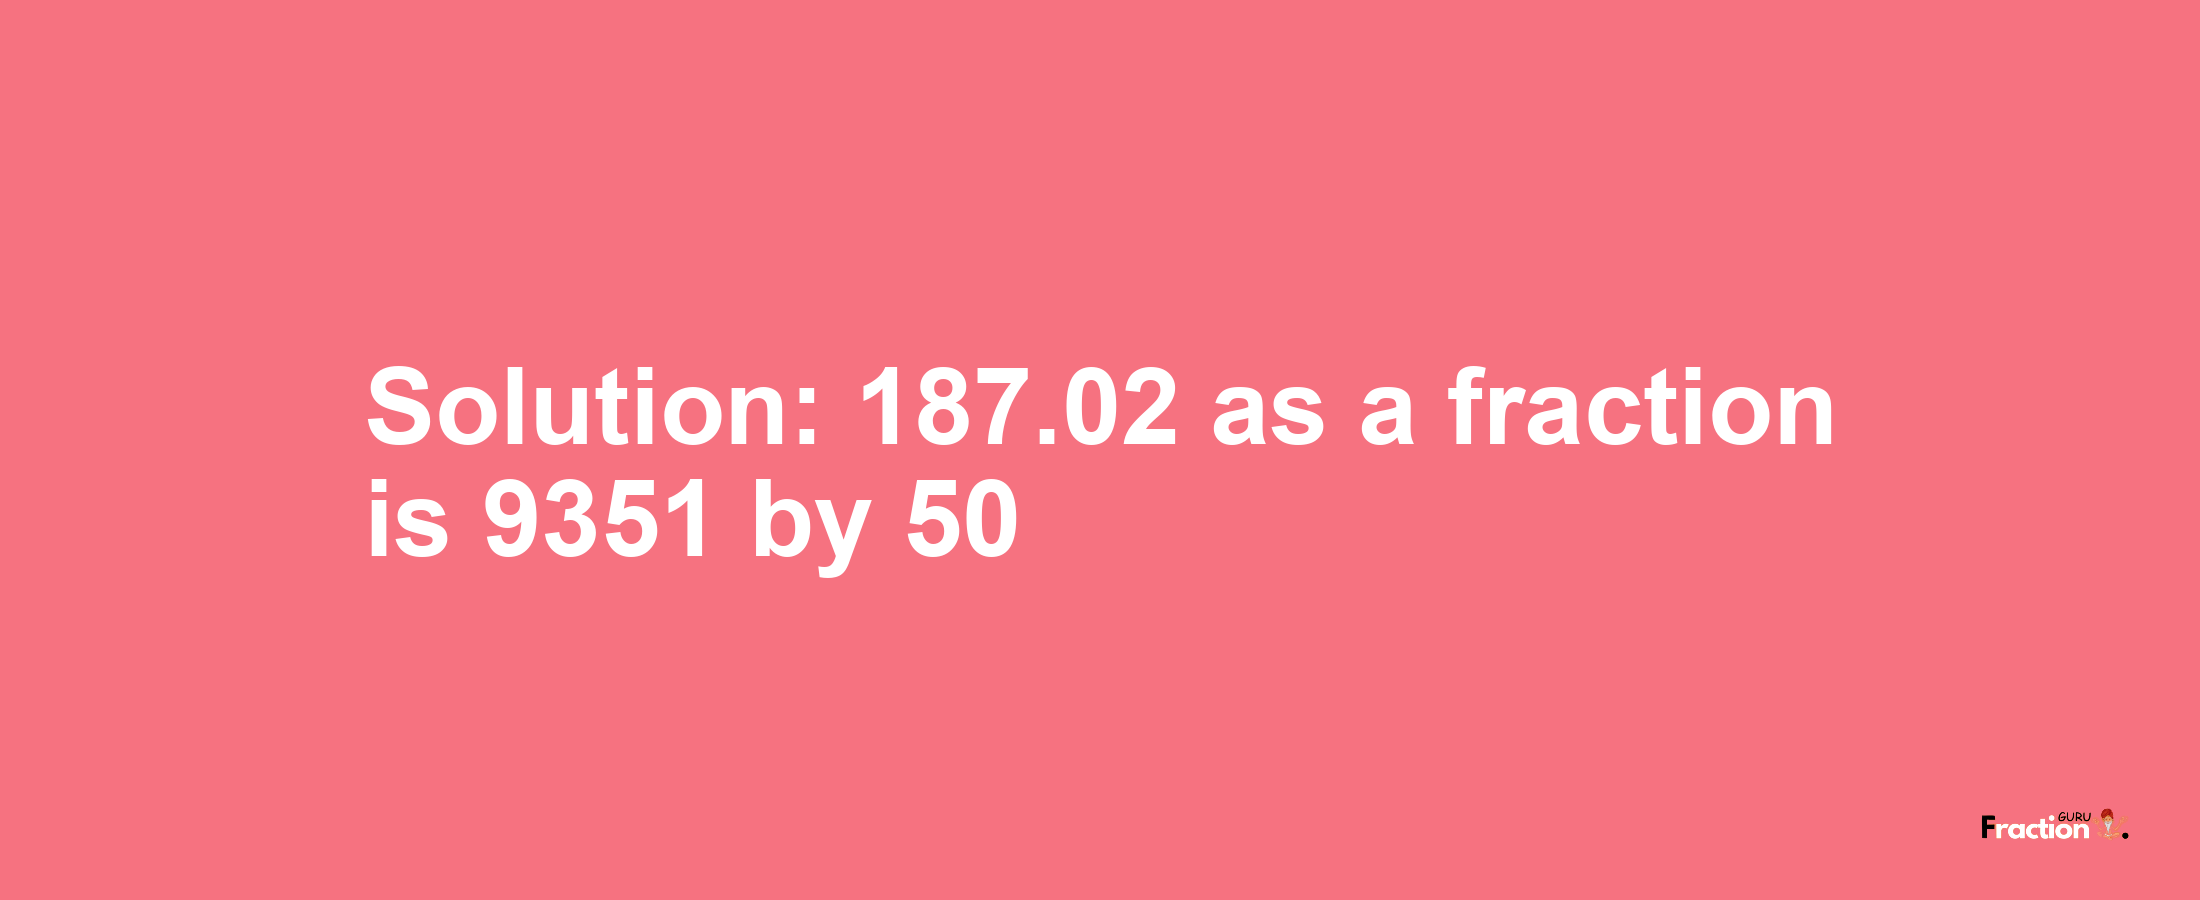 Solution:187.02 as a fraction is 9351/50